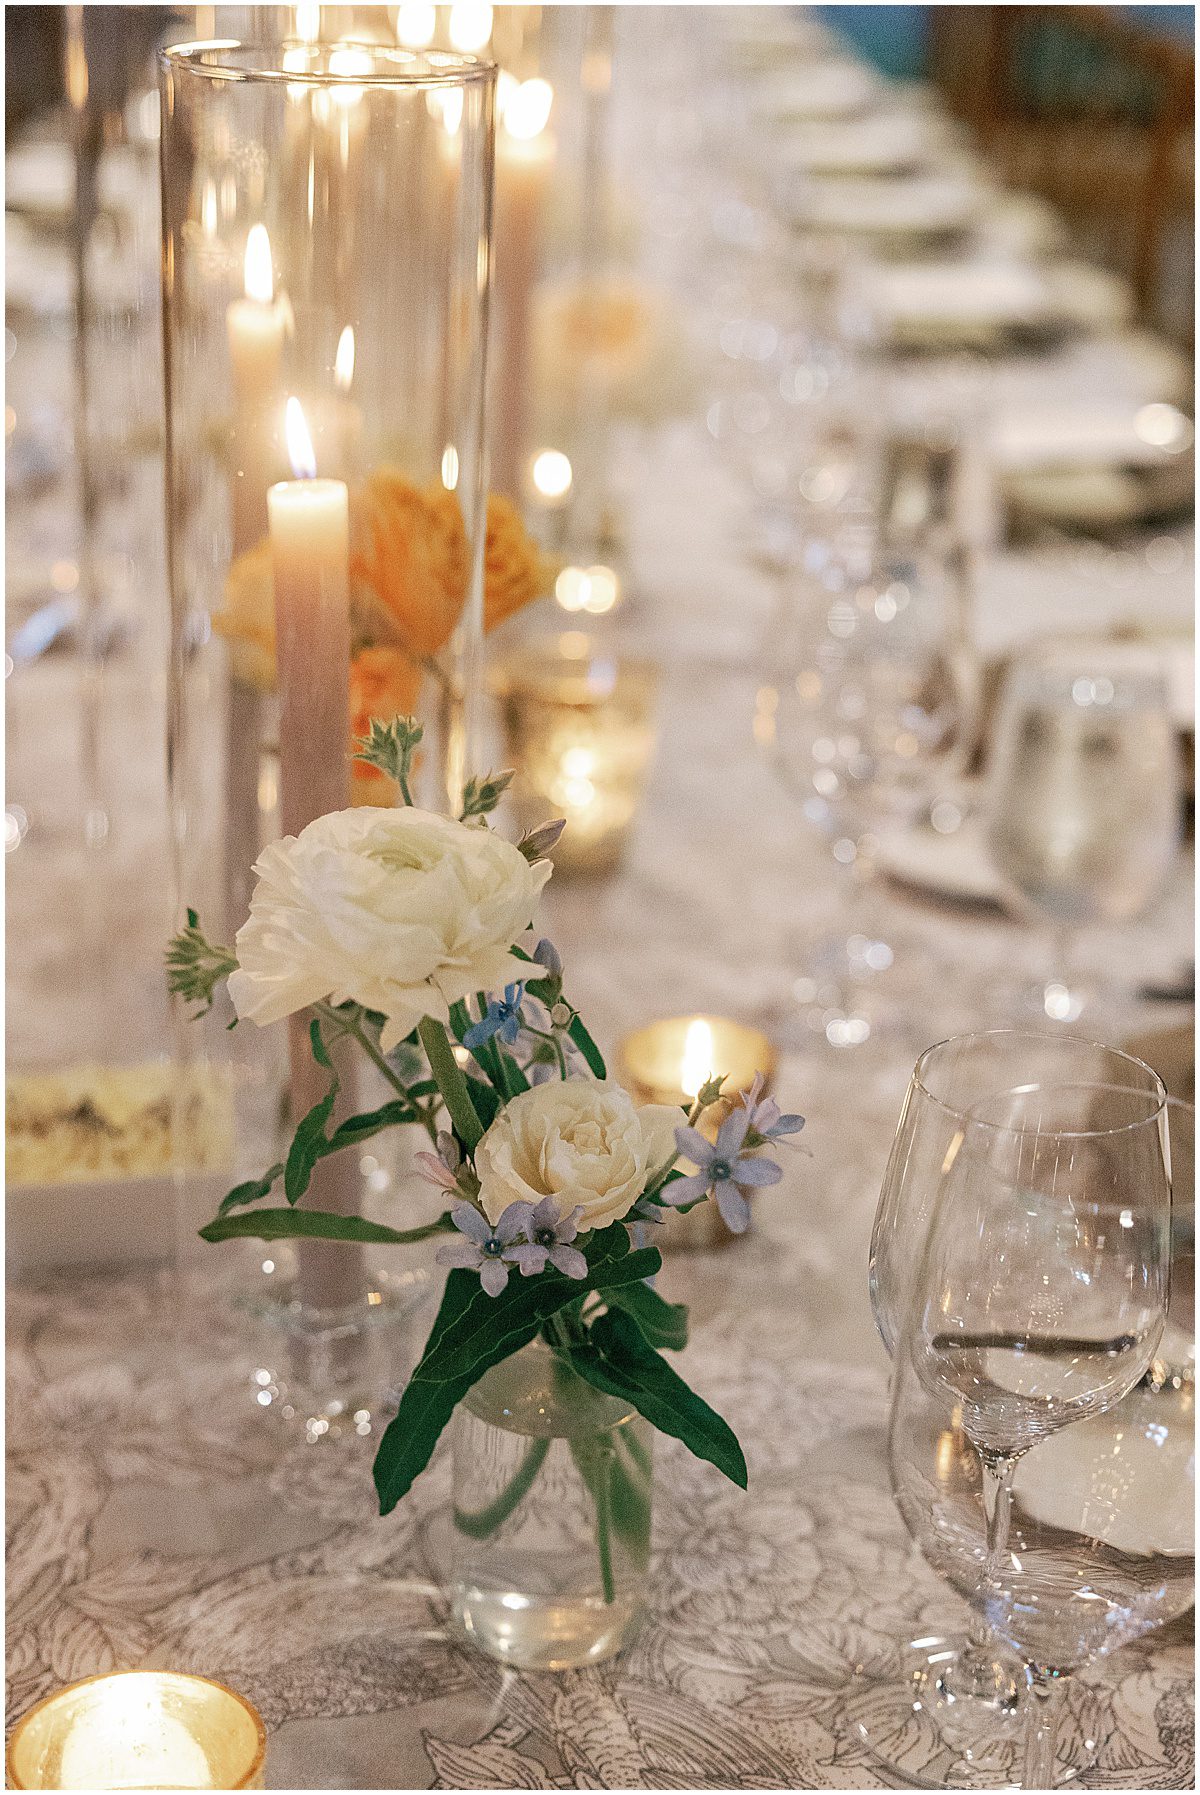 Wedding Reception Table Decor Flowers and Candles Photo